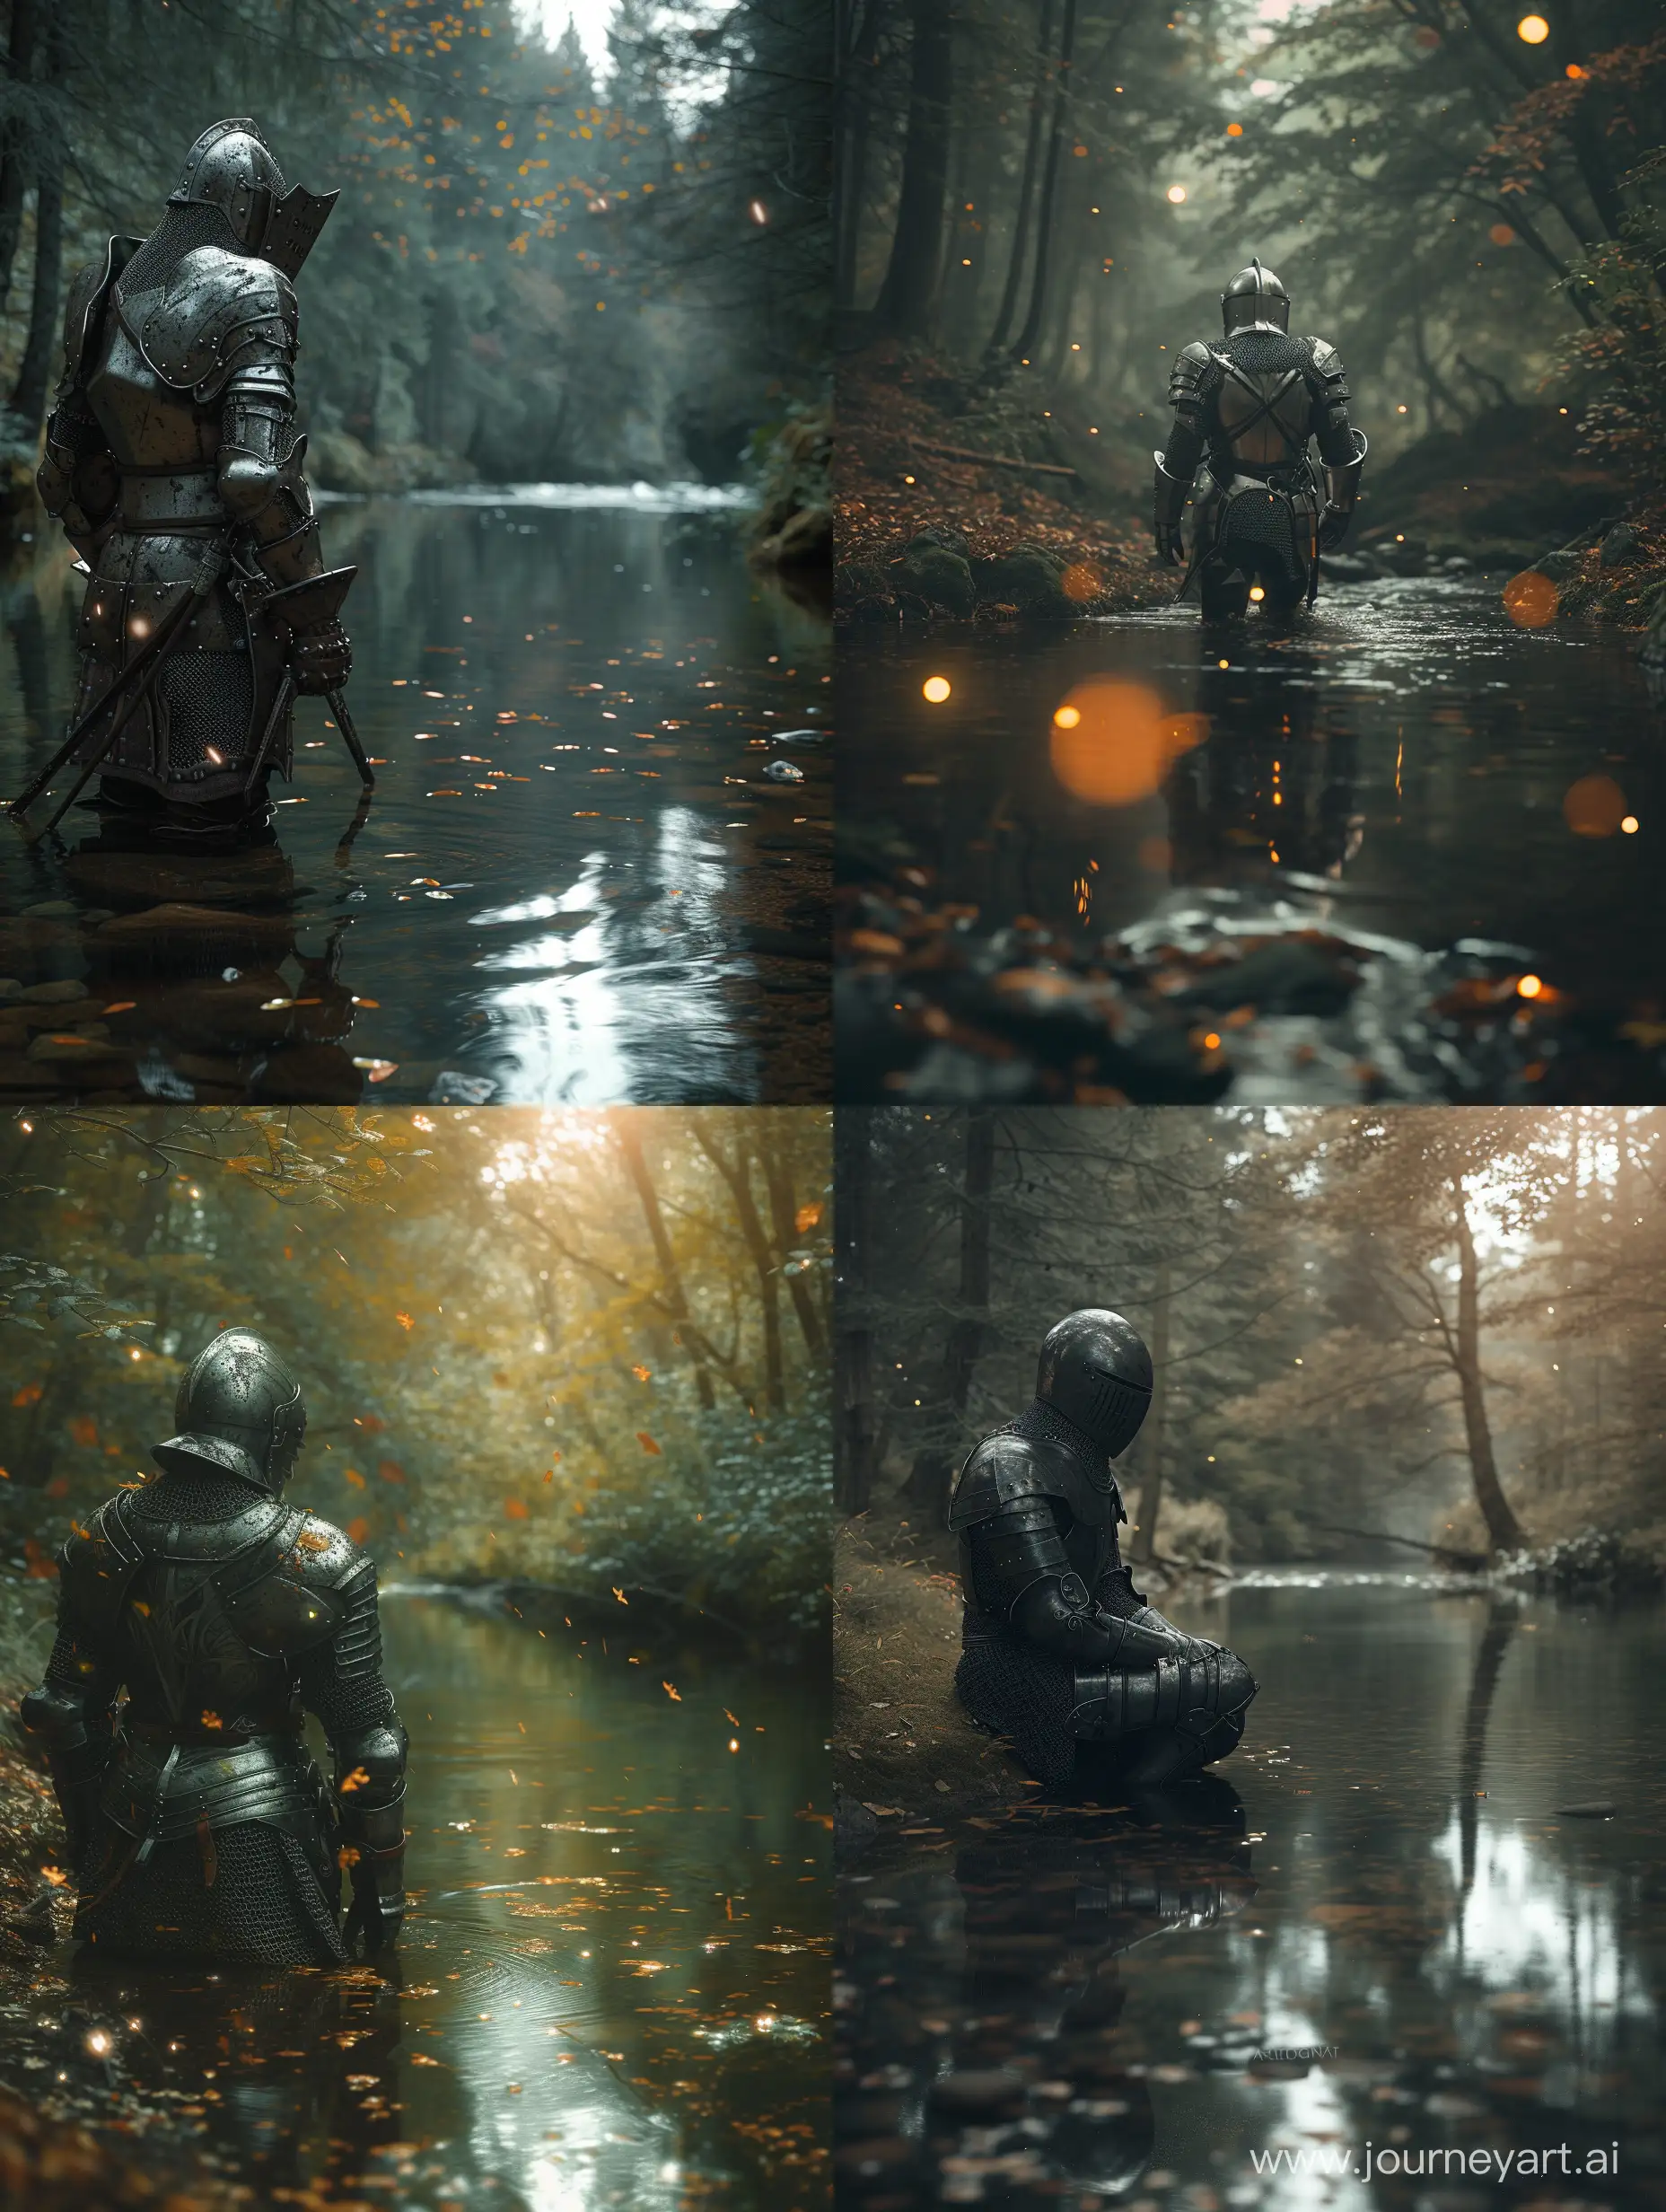 hyper realistic wearing medieval armor  in a forest near a river; hyper realistic scene with all cinema techniques, lights, water, reflection, etc.; all the techniques that exist to make a photo hyper realistic and cinematic.